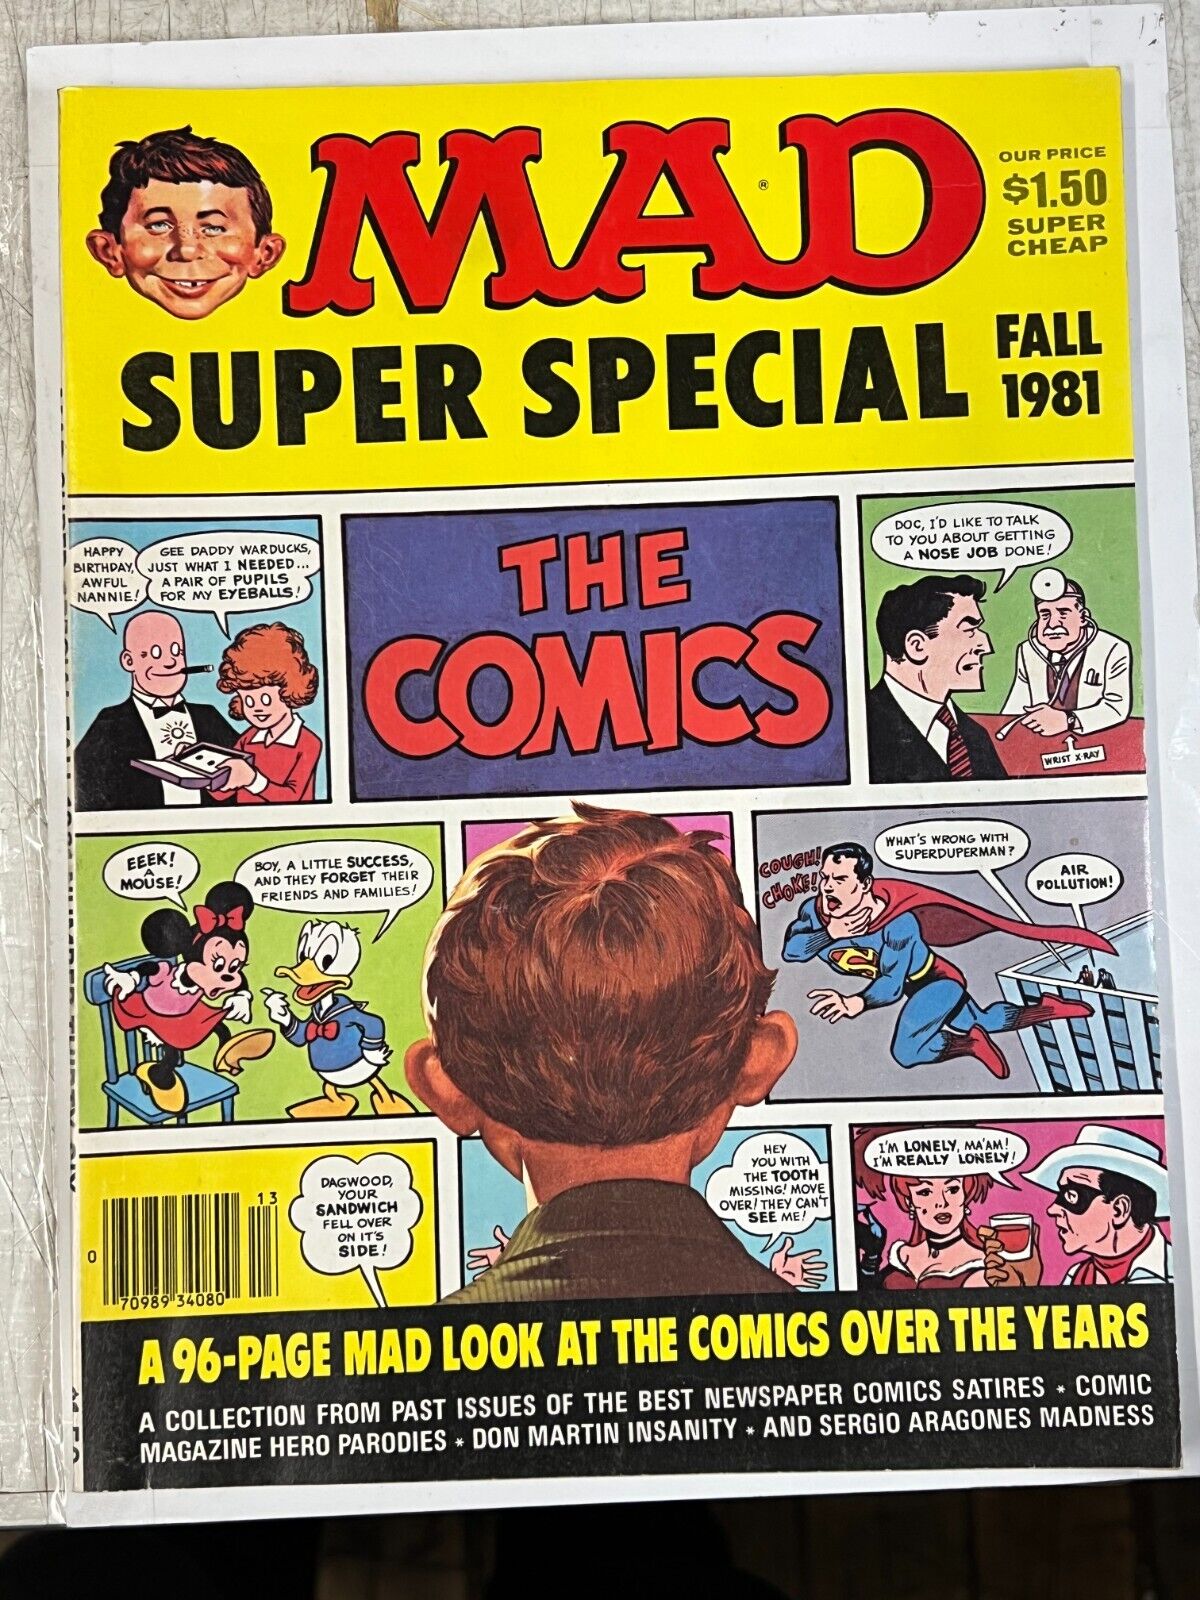 MAD Magazine Super Special Fall 1981 # 36 | Combined Shipping B&B